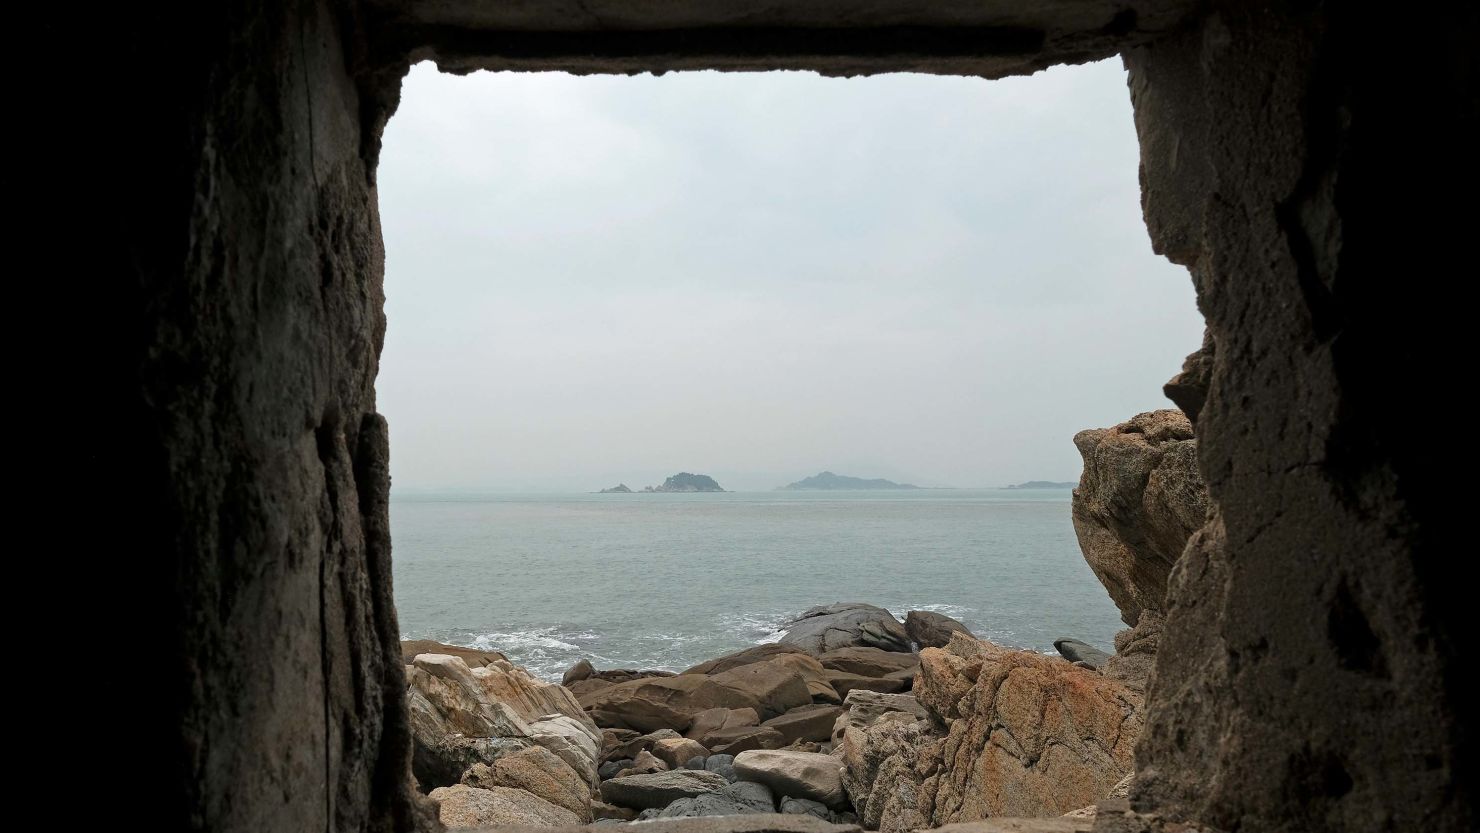 View of Dadan and Erdan Islands from Shaxi Fort located near Qingchi Village, on the most western point of Kinmen island.